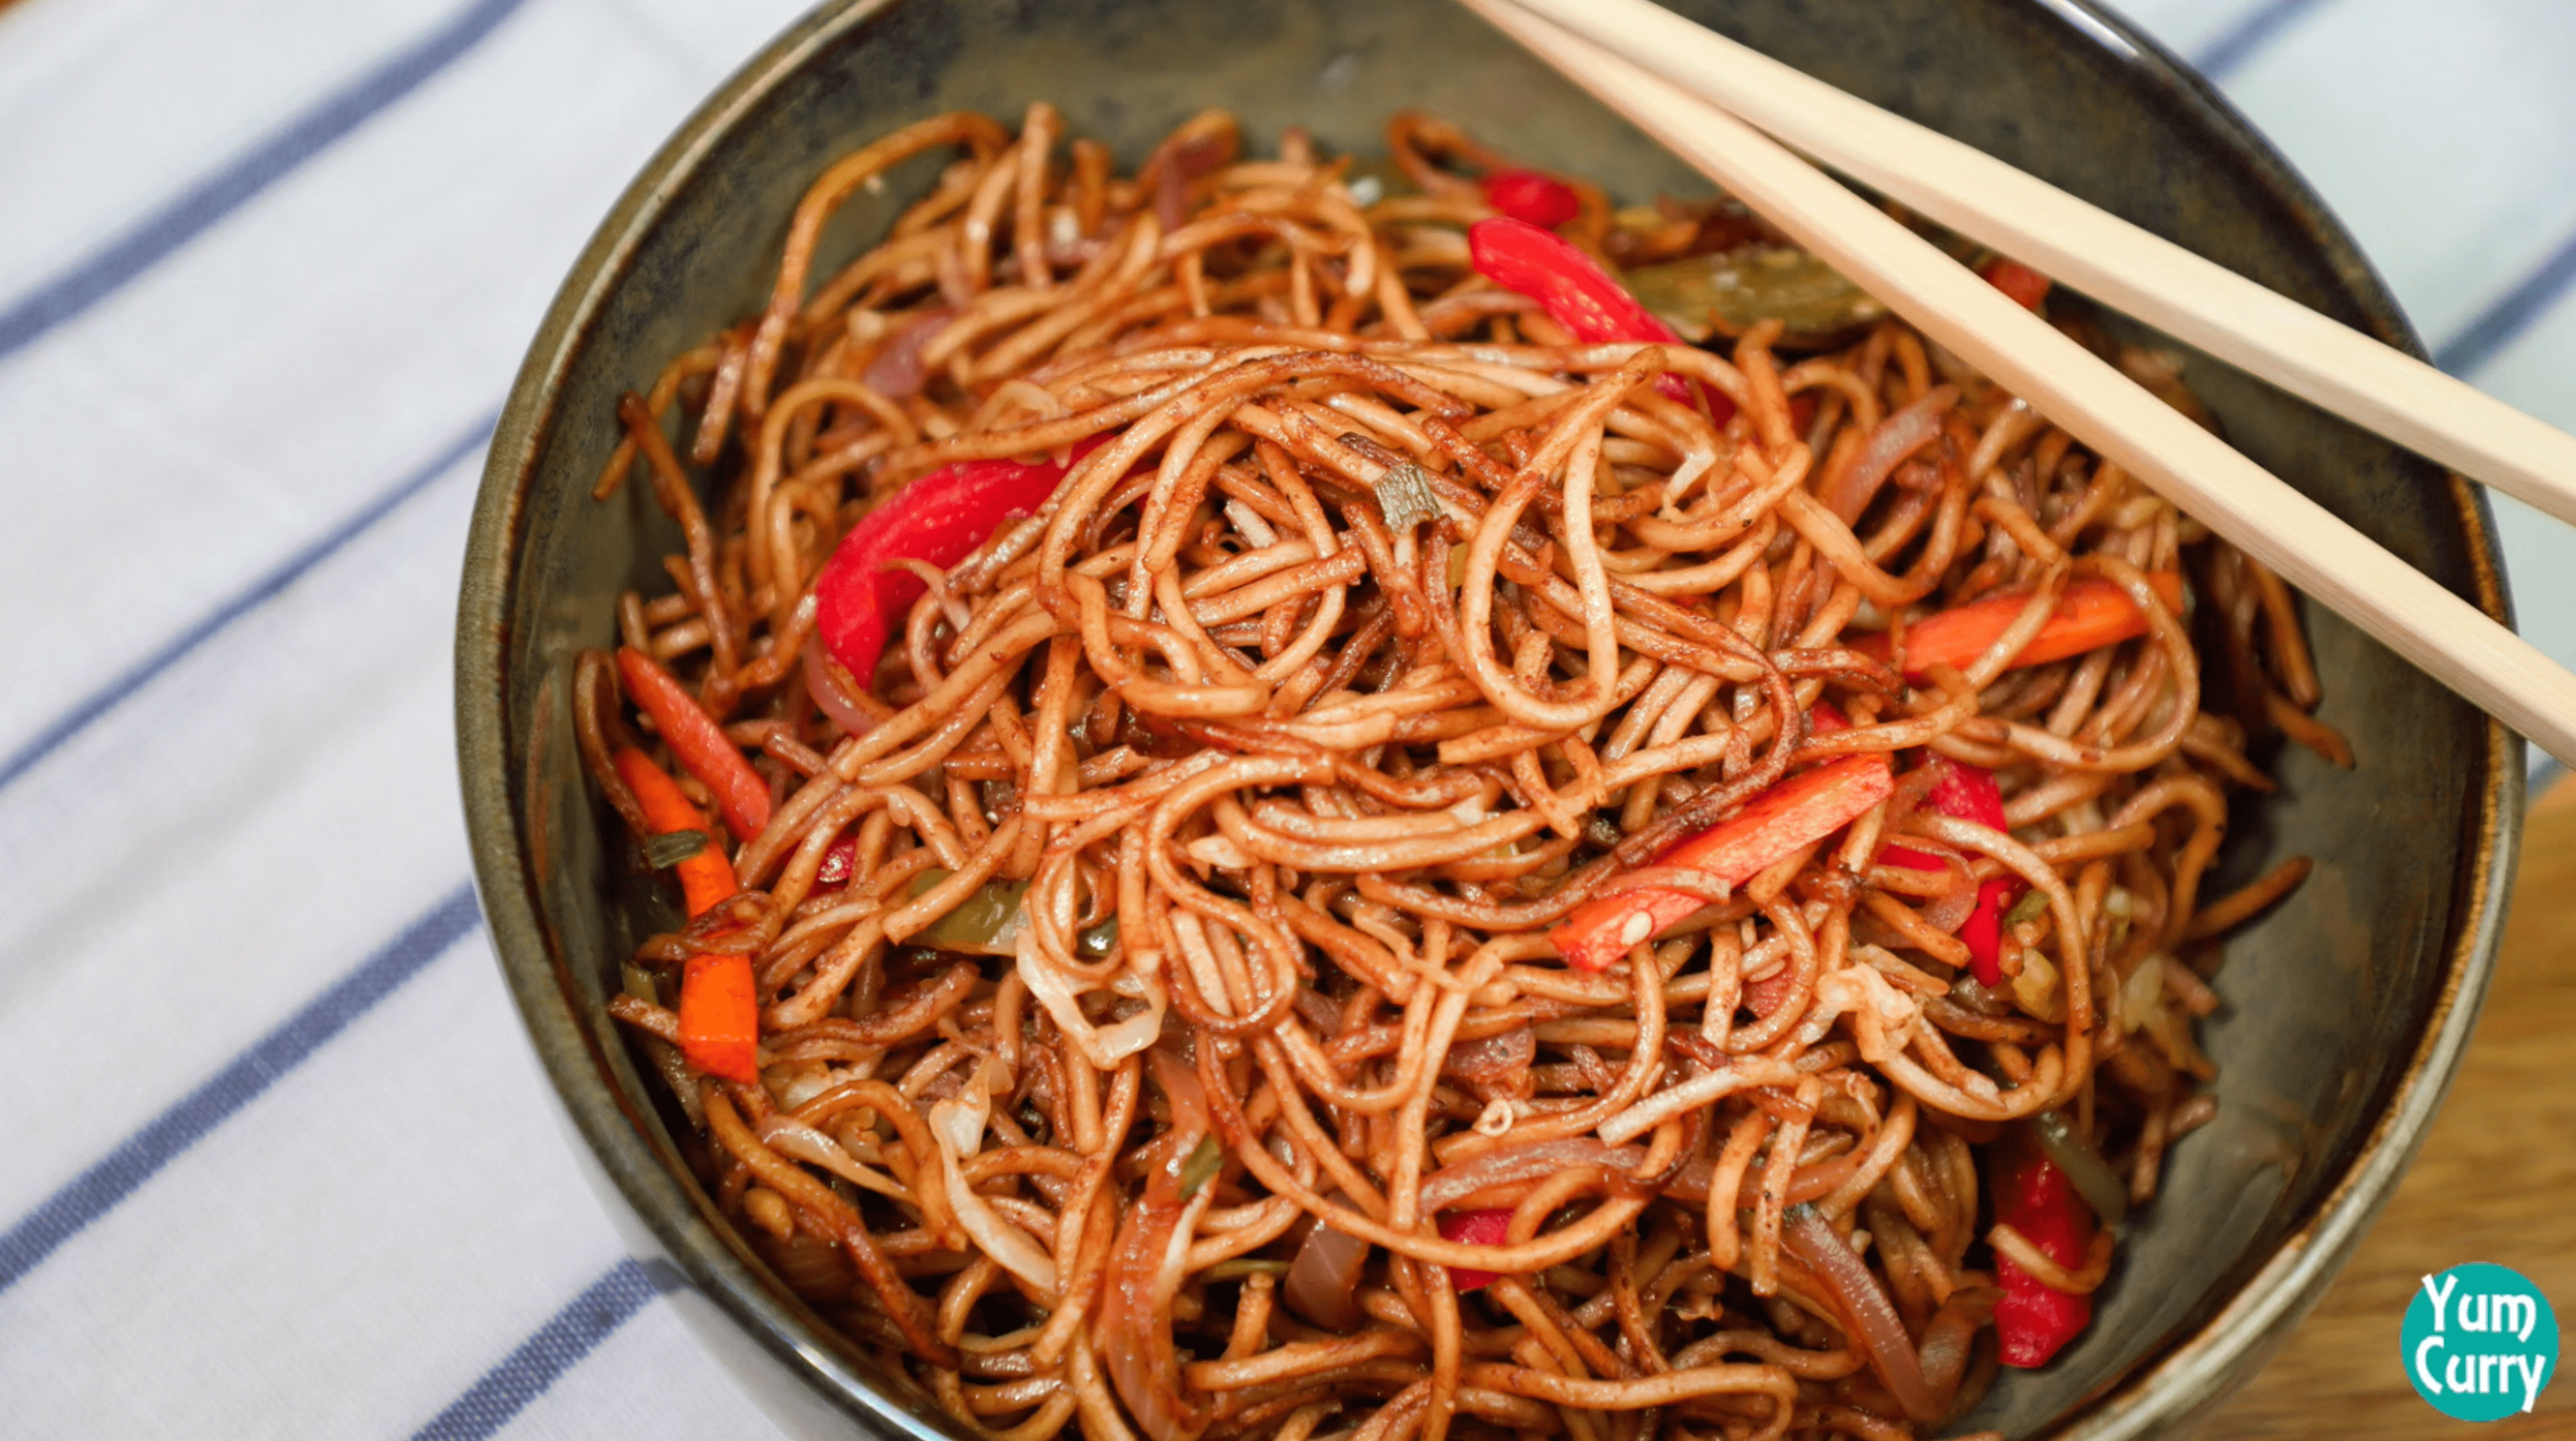 Noodles - Chowmein